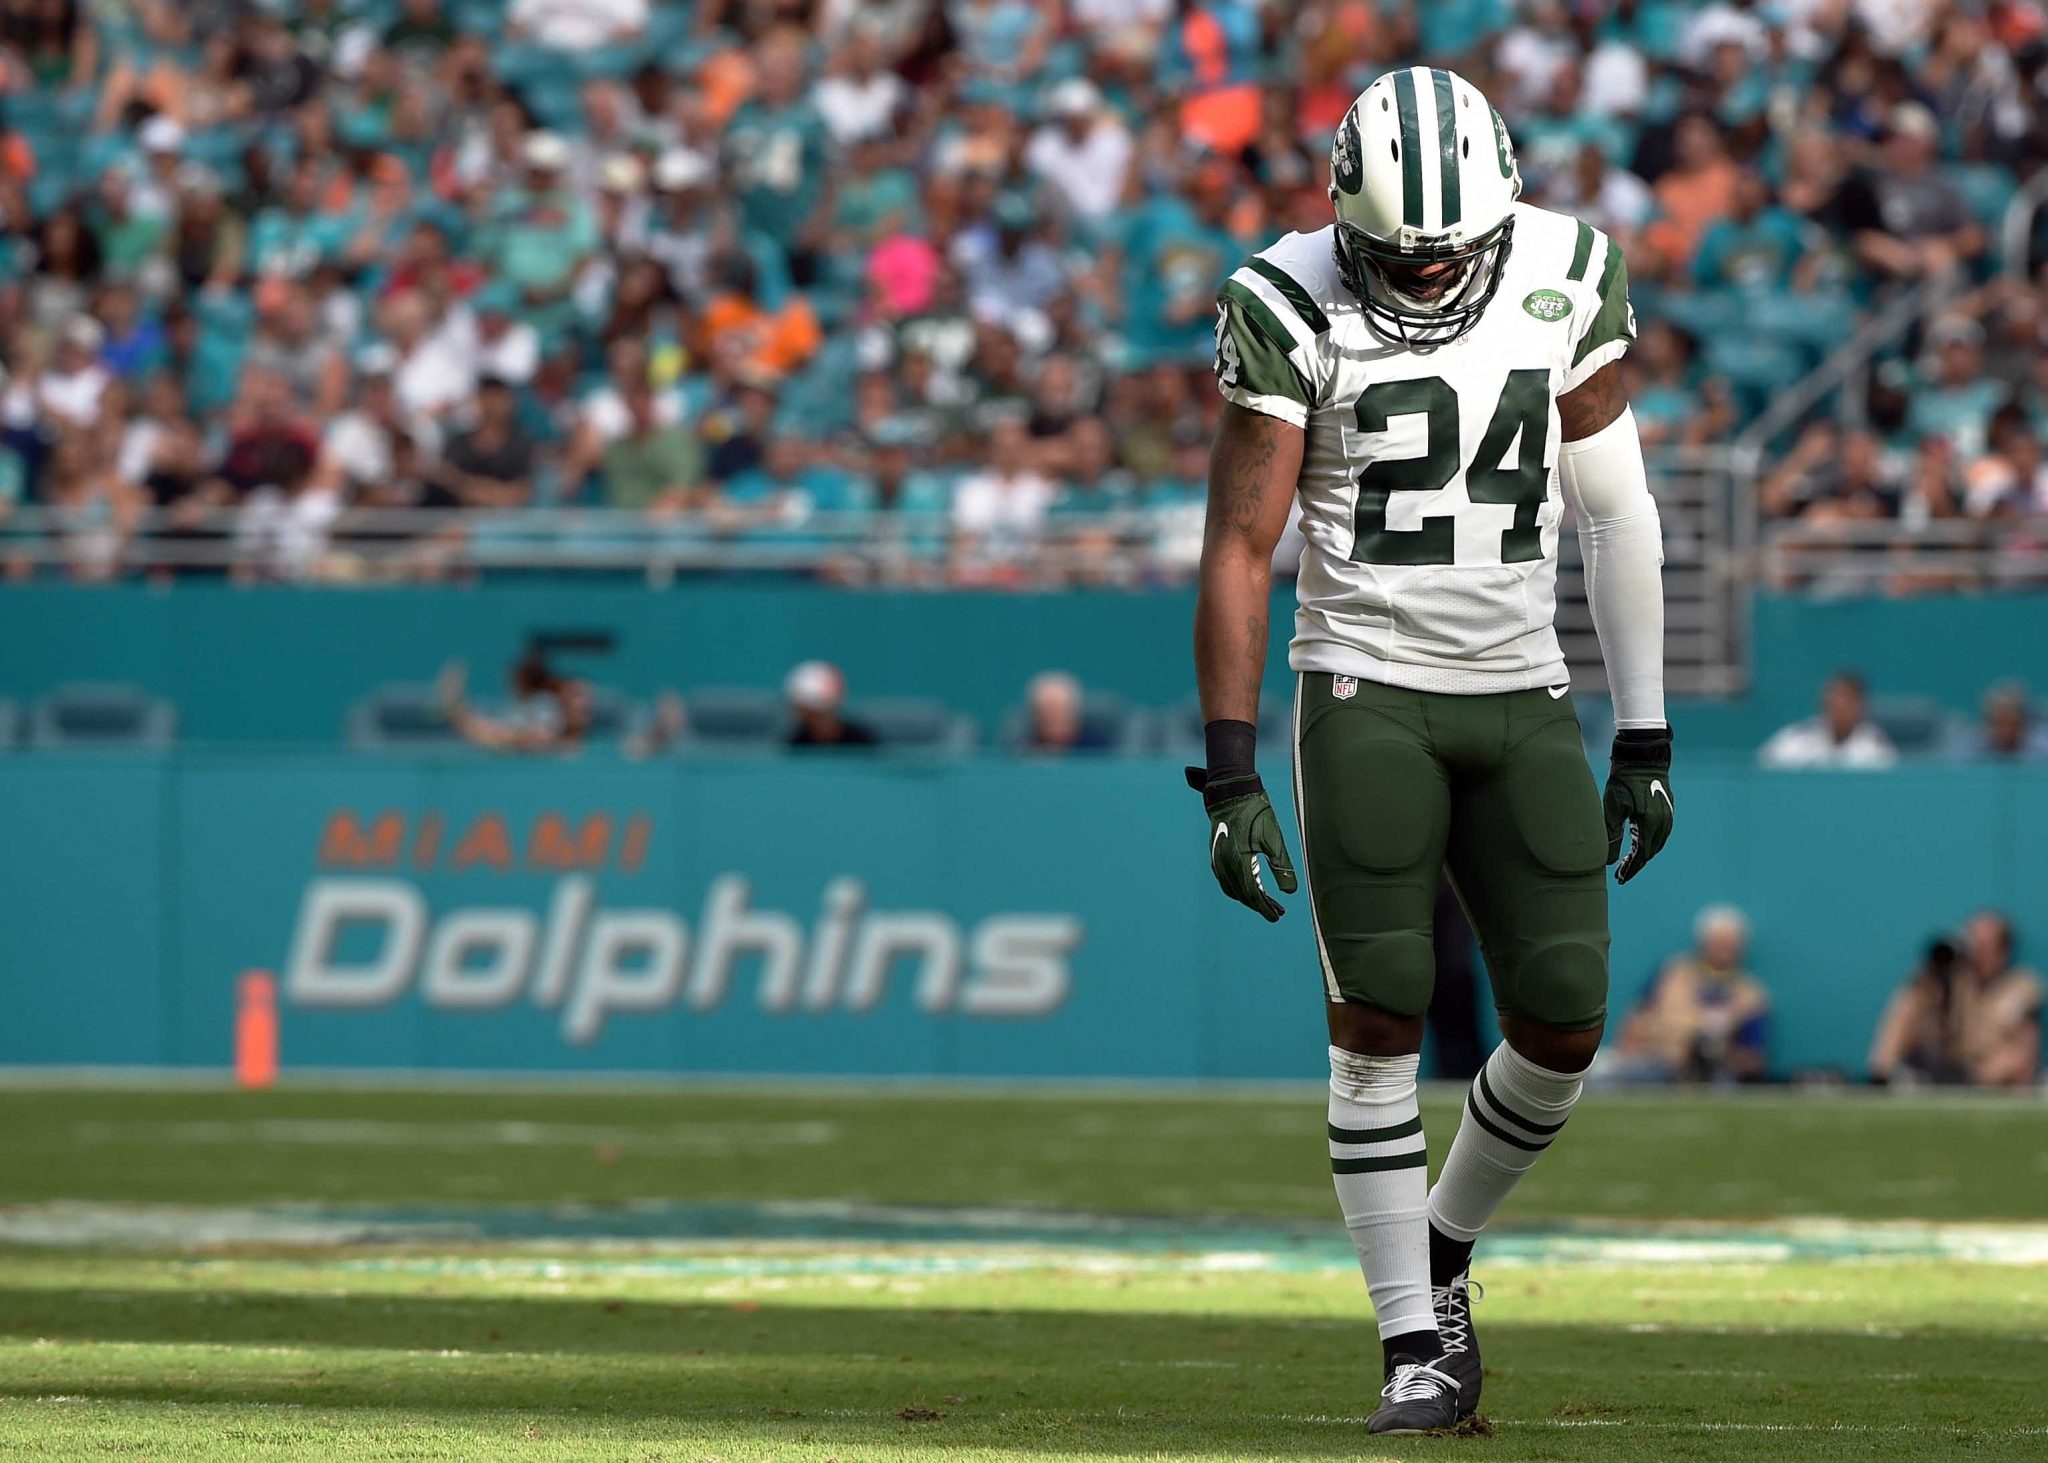 New York Jets' Darrelle Revis doesn't want to play football anymore (Report) 